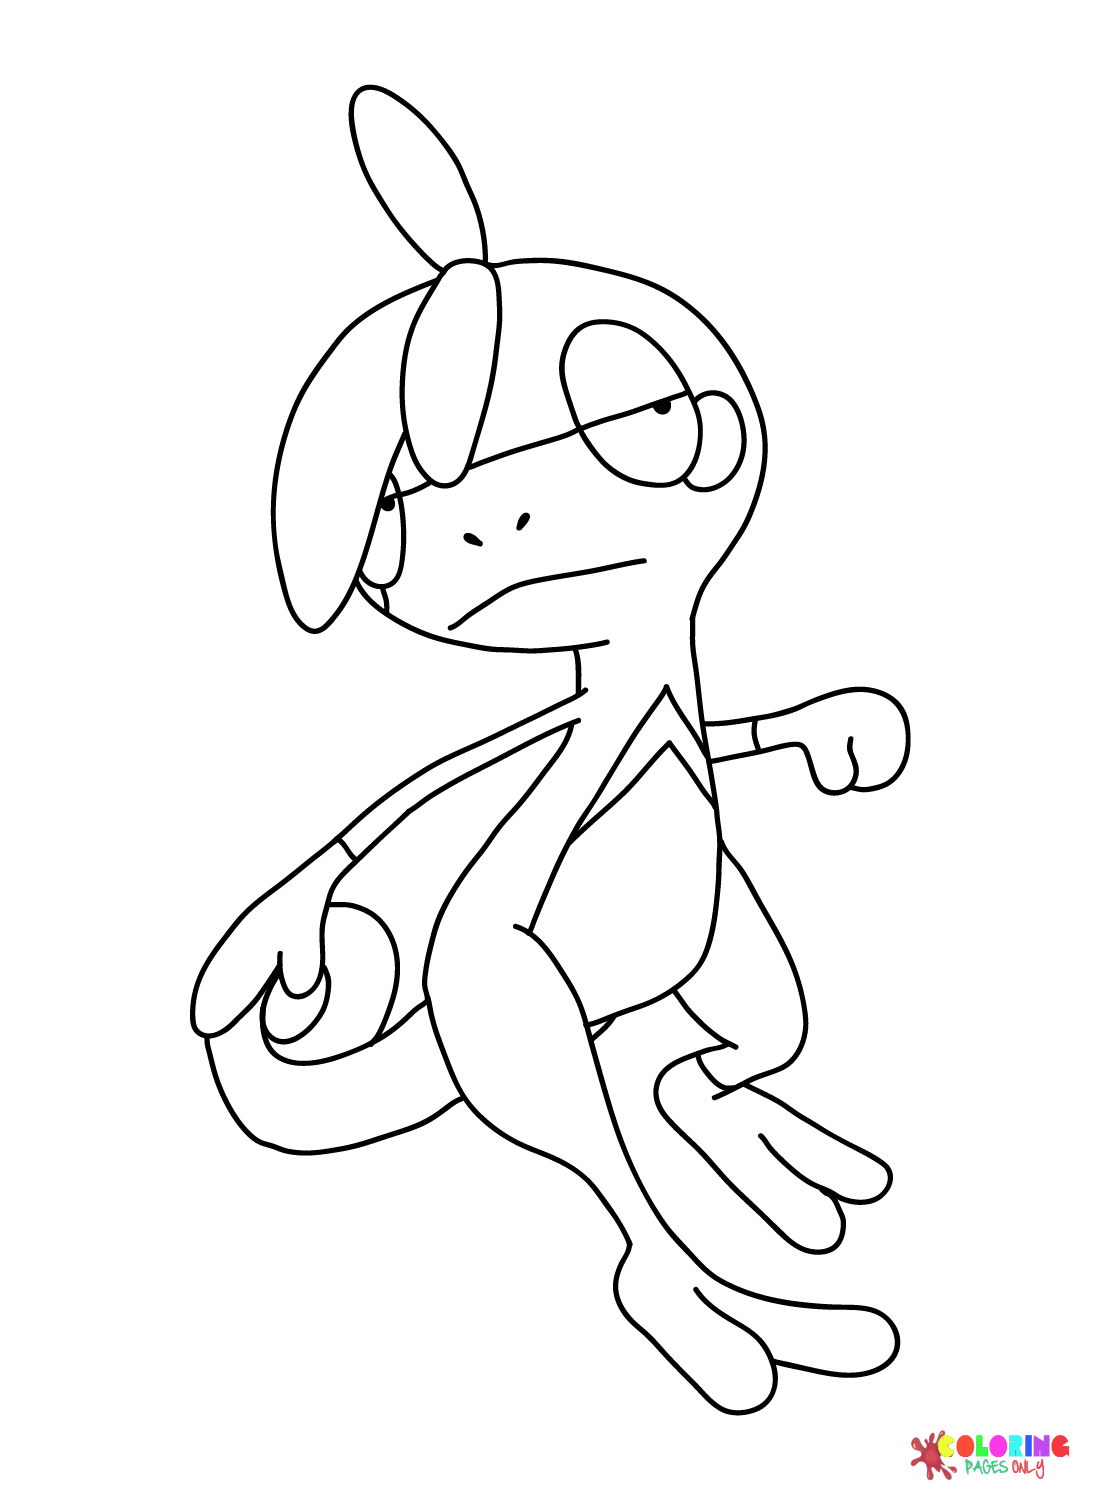 Pokemon Froakie Coloring Page - Get Coloring Pages